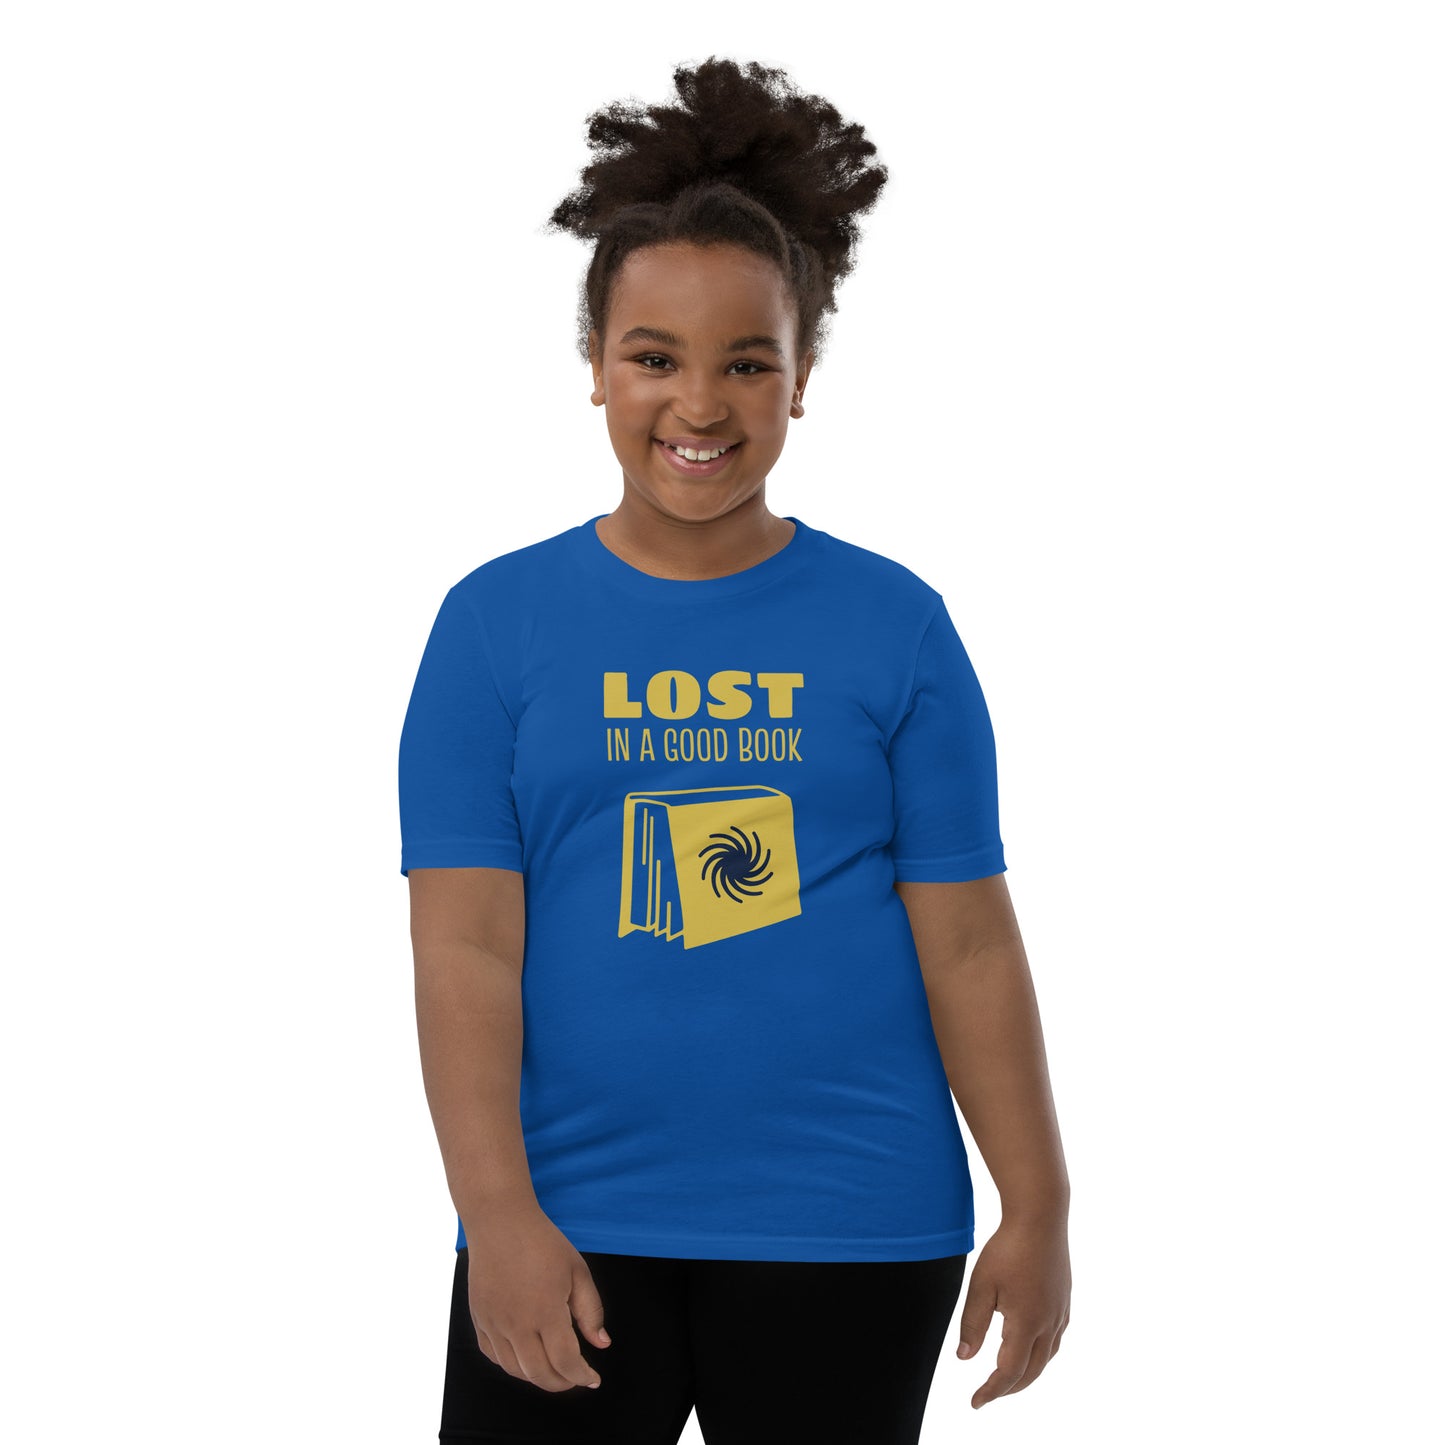 Lost in a Good Book Youth Short Sleeve T-Shirt